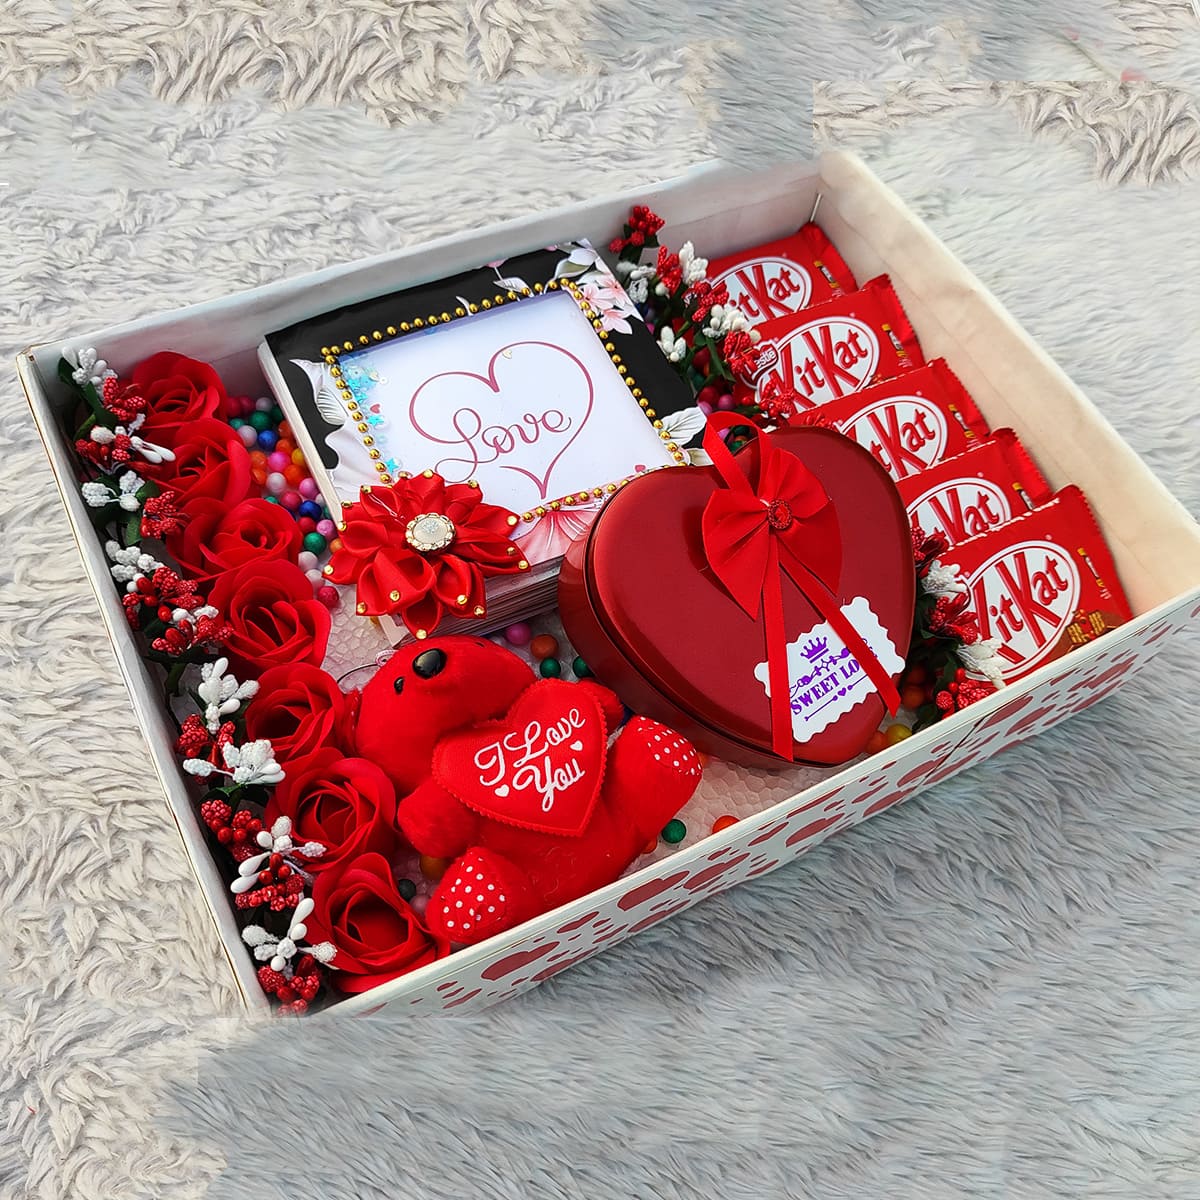 Valentine's Day Gift Baskets: Nuts About You Valentines Gift | DIYGB